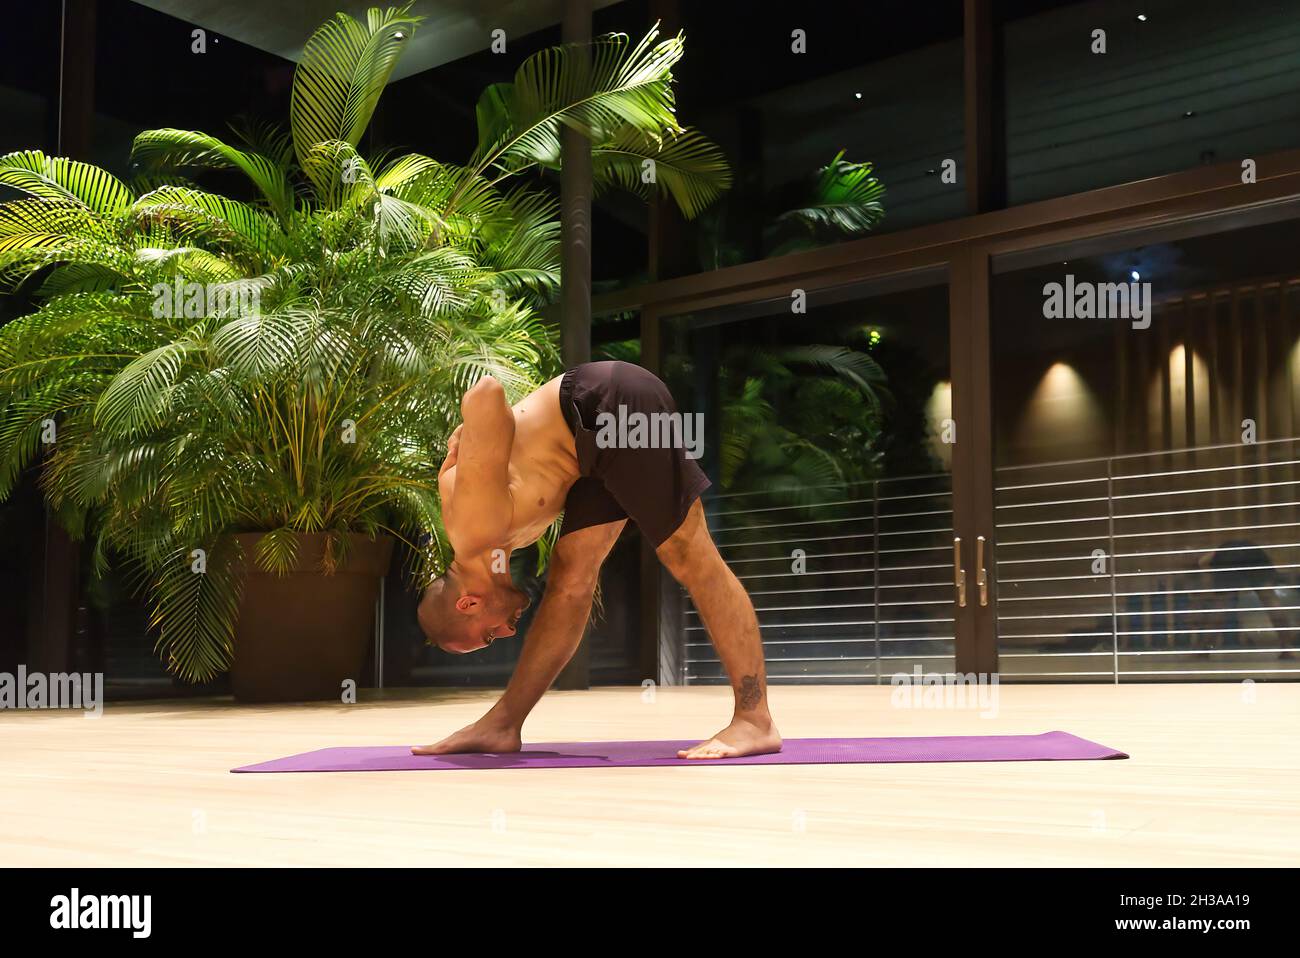 Middle aged handsome Caucasian male performs a yoga position indoors. Stock Photo